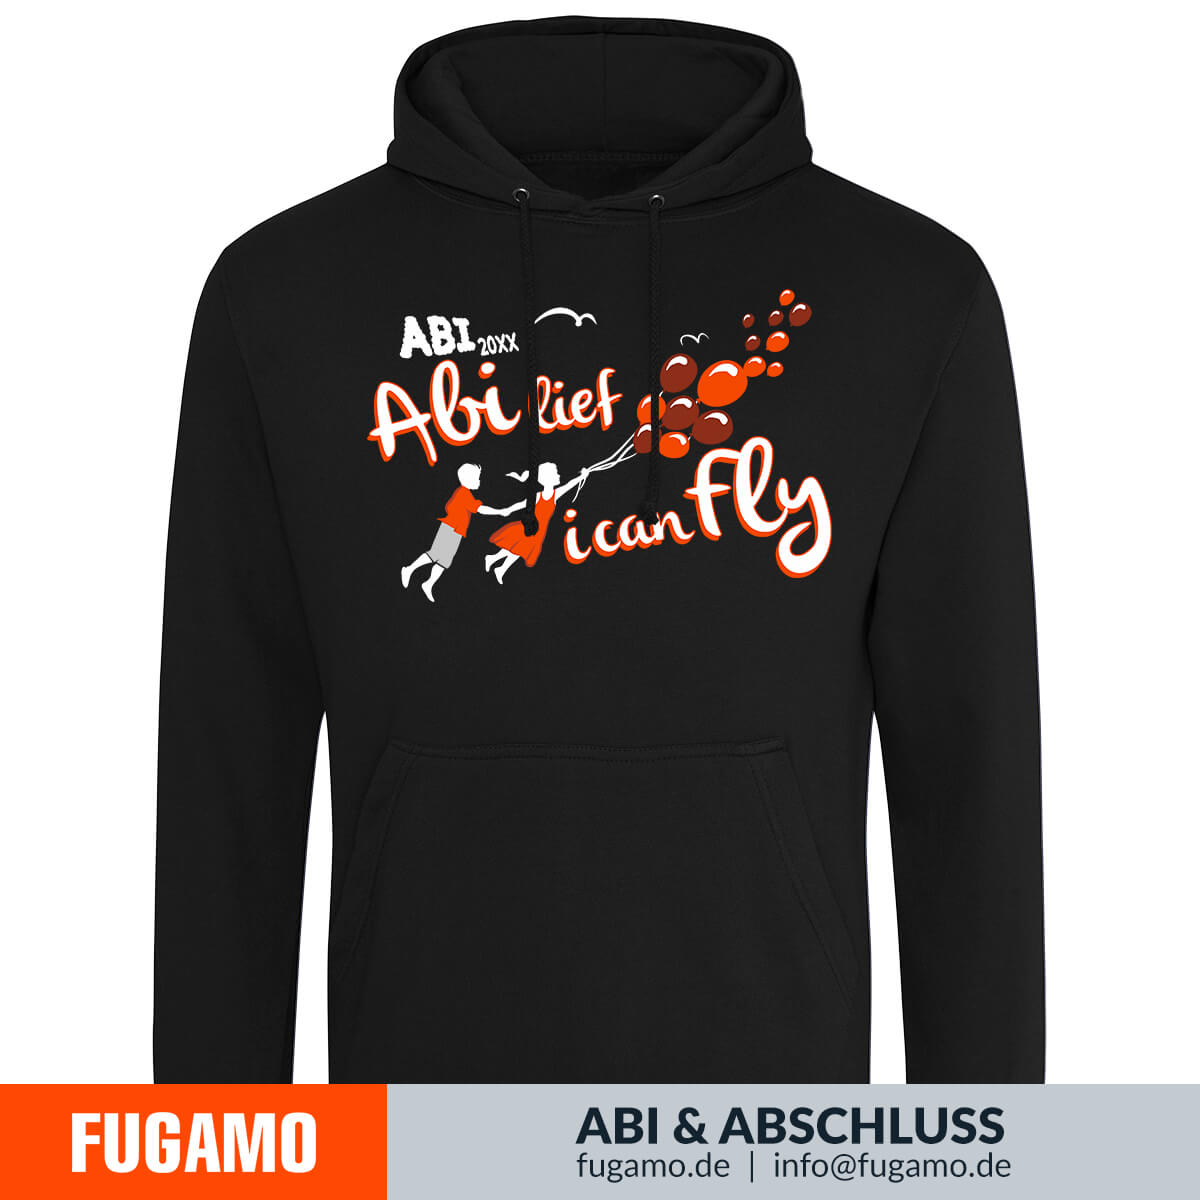 ABI lief i can fly - 04